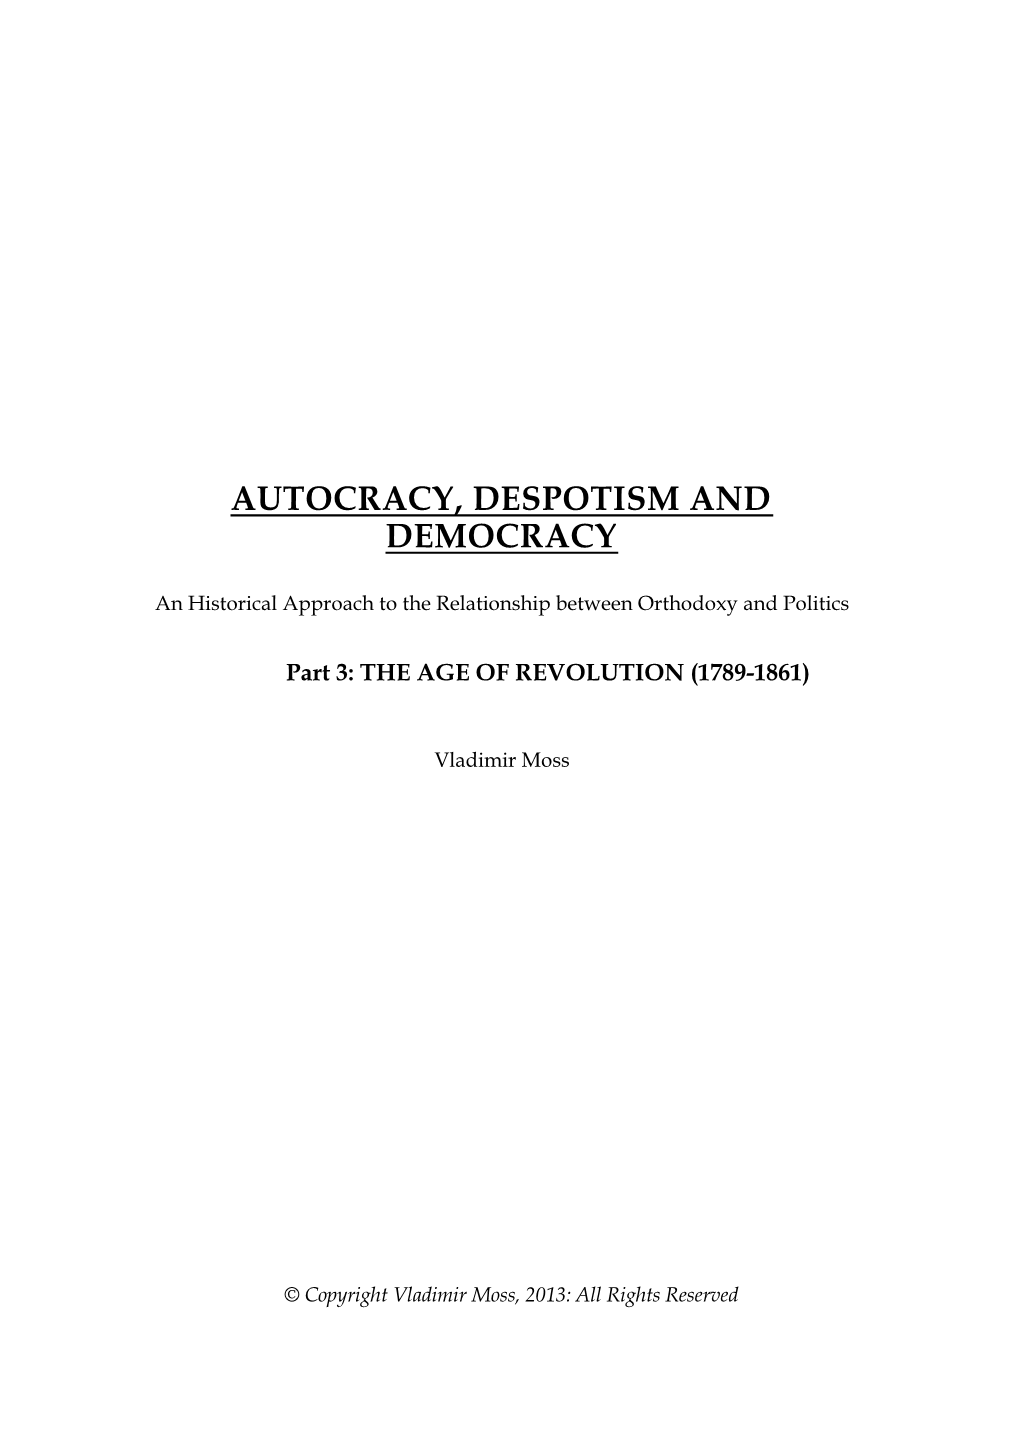 Autocracy, Despotism and Democracy, Part 1: Israel, Rome and Constantinople (To 1453) and Autocracy, Despotism and Democracy, Part 2: the Age of Reason (1453-1789)